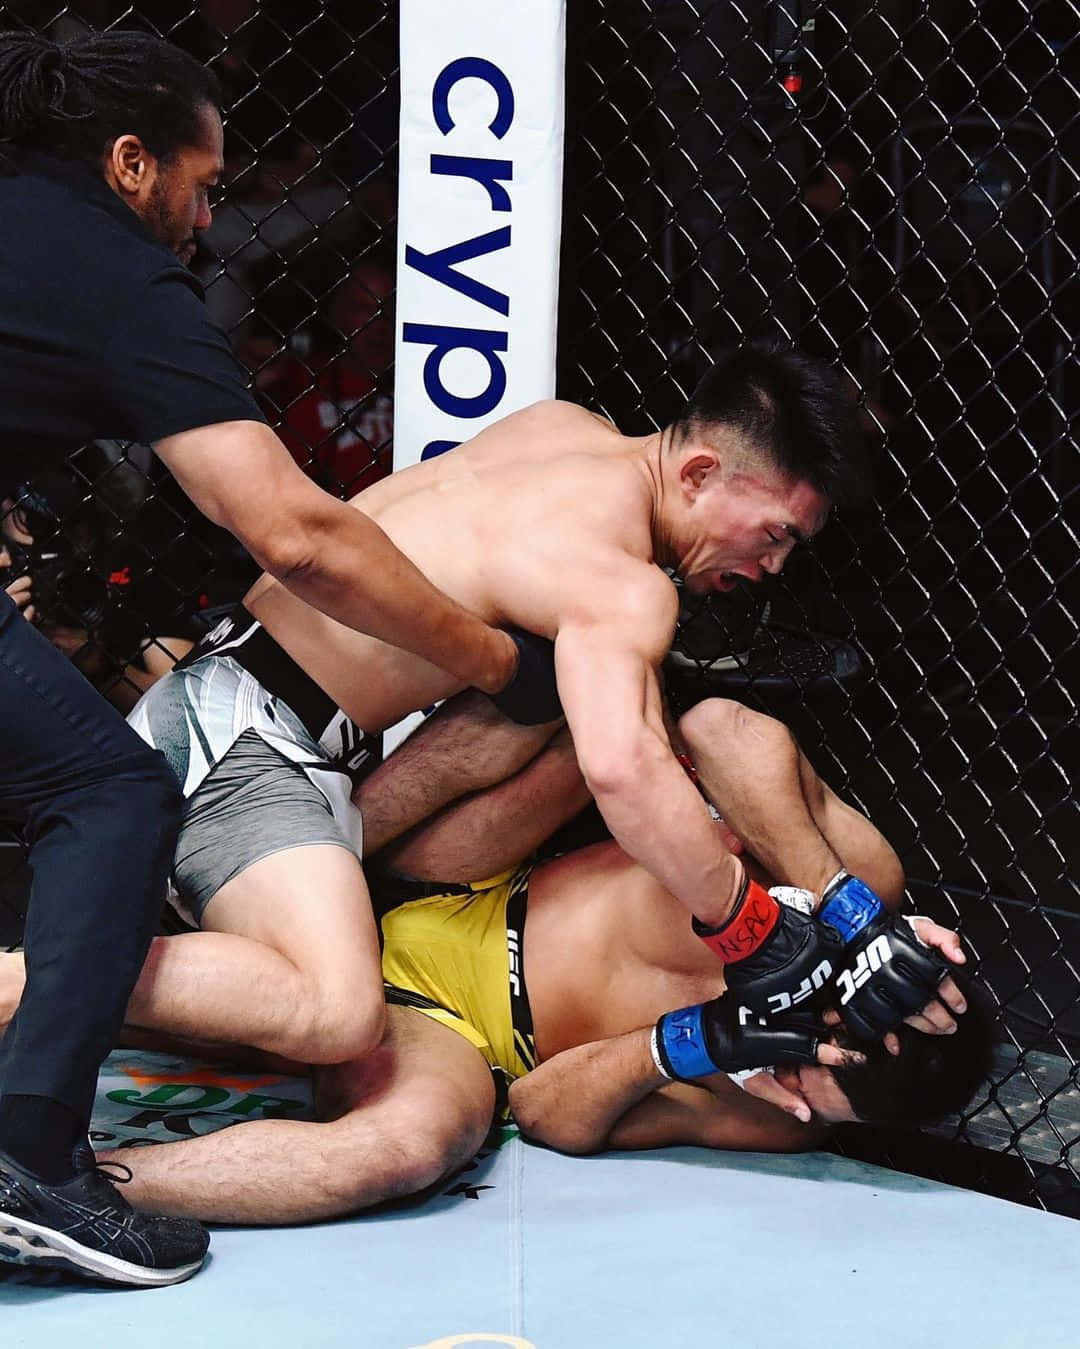 Songyadong Vs Julio Arce Is Not Related To Computer Or Mobile Wallpaper Context. It Appears To Be A Matchup Between Two Mixed Martial Arts Fighters. Fondo de pantalla